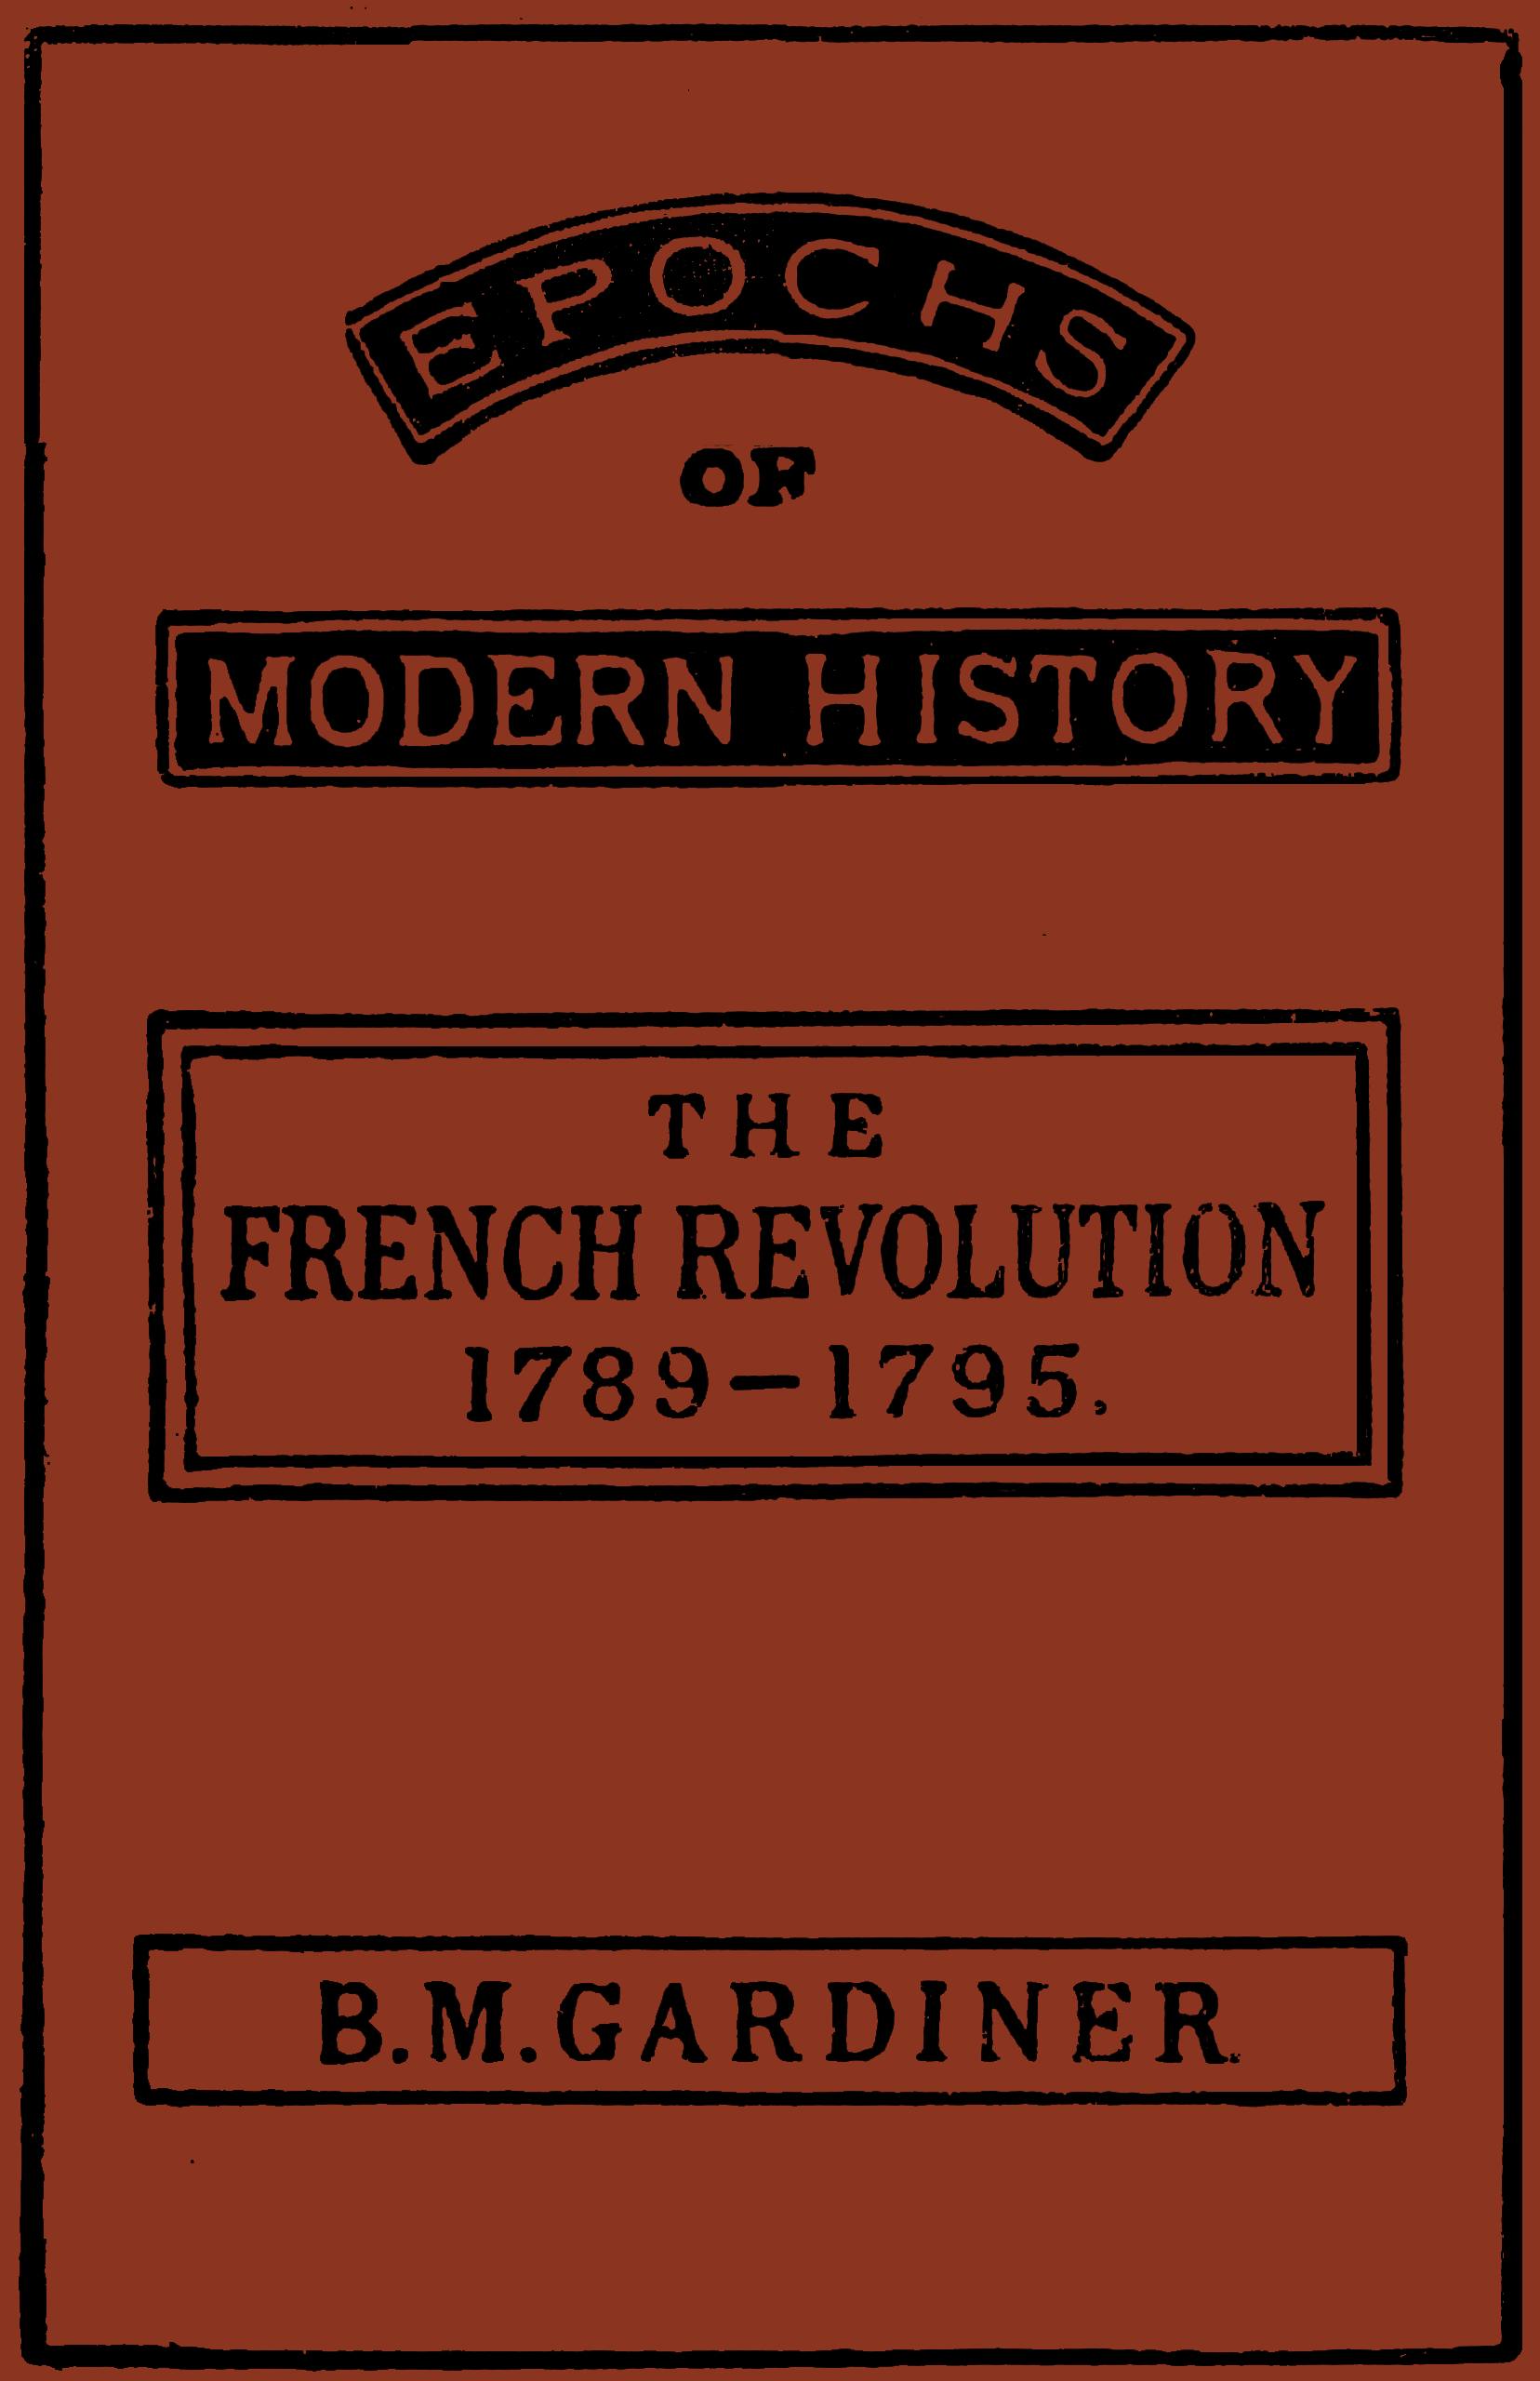 The French Revolution, 1789-1795